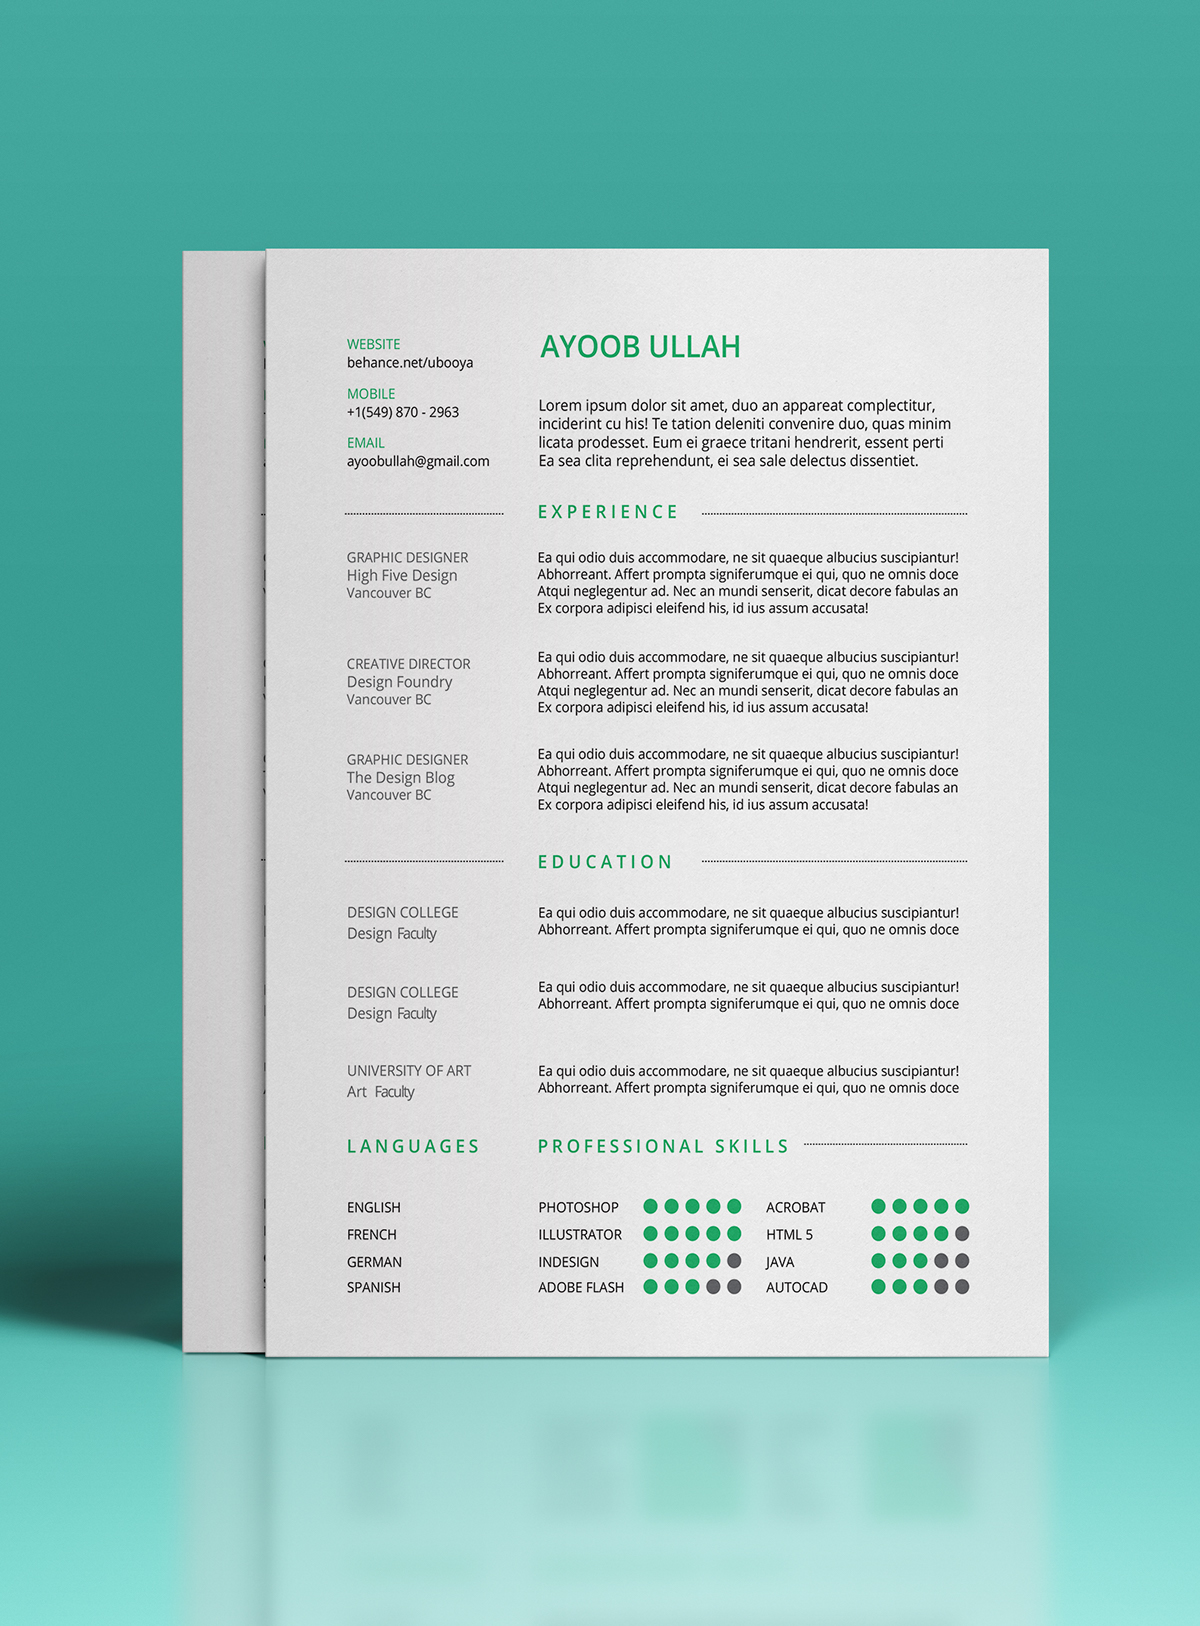 Resume template free CV graphicdesign type design sample editorialdesign cover Layout vancouver Canada